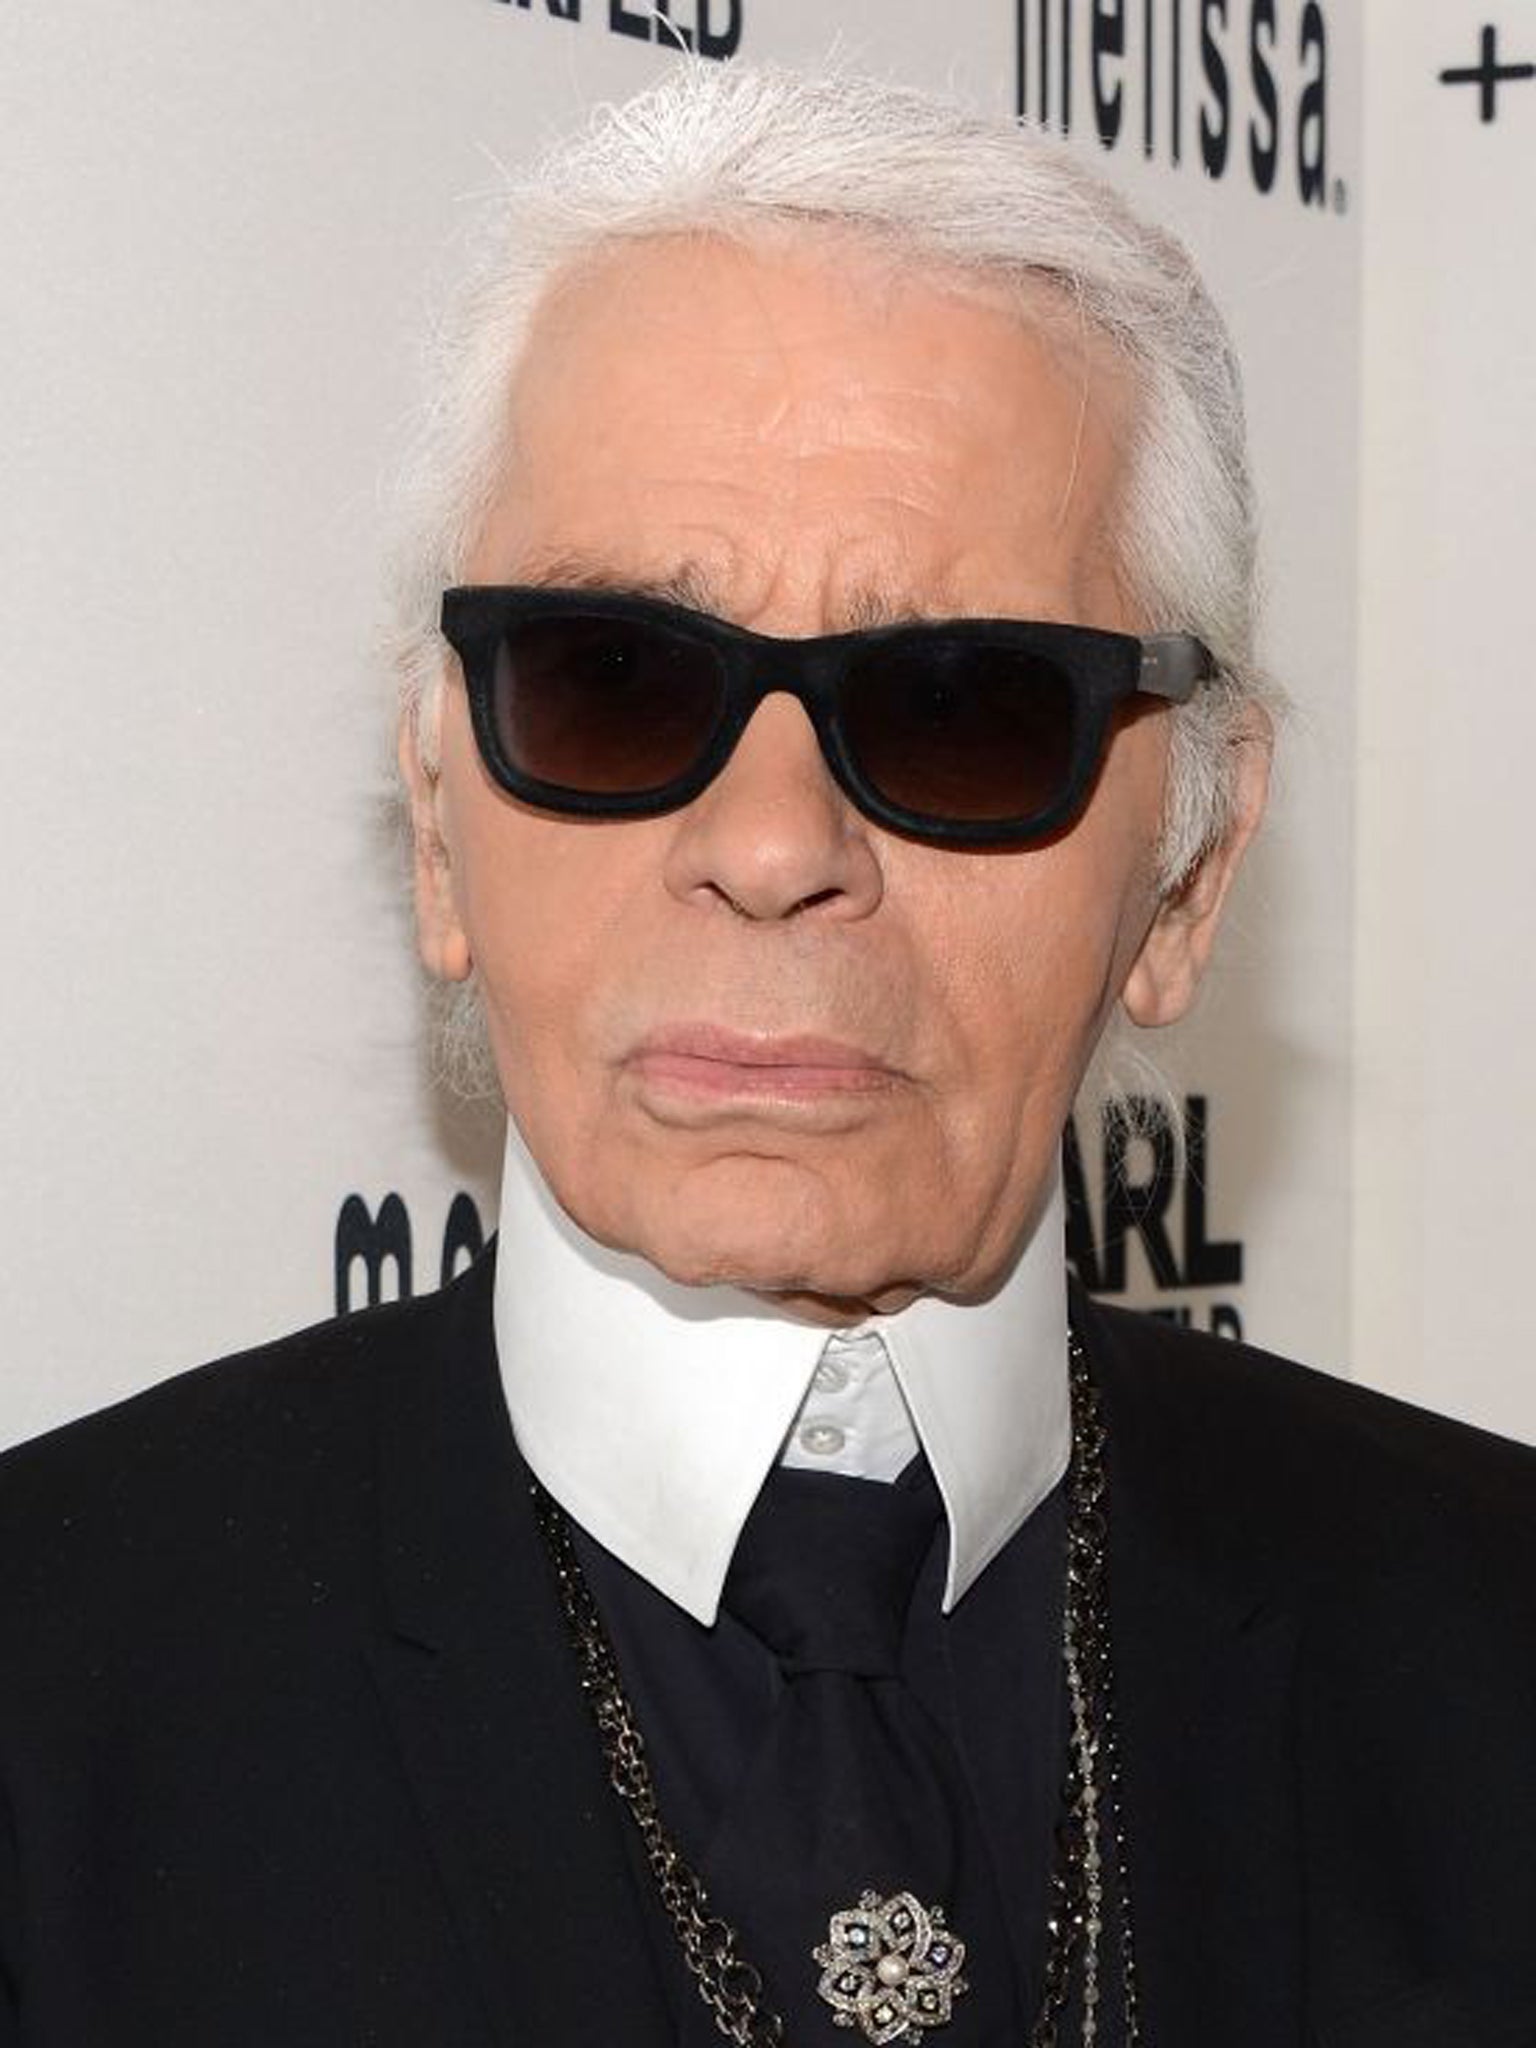 Karl Lagerfeld says he wants to get married... to his cat | The ...